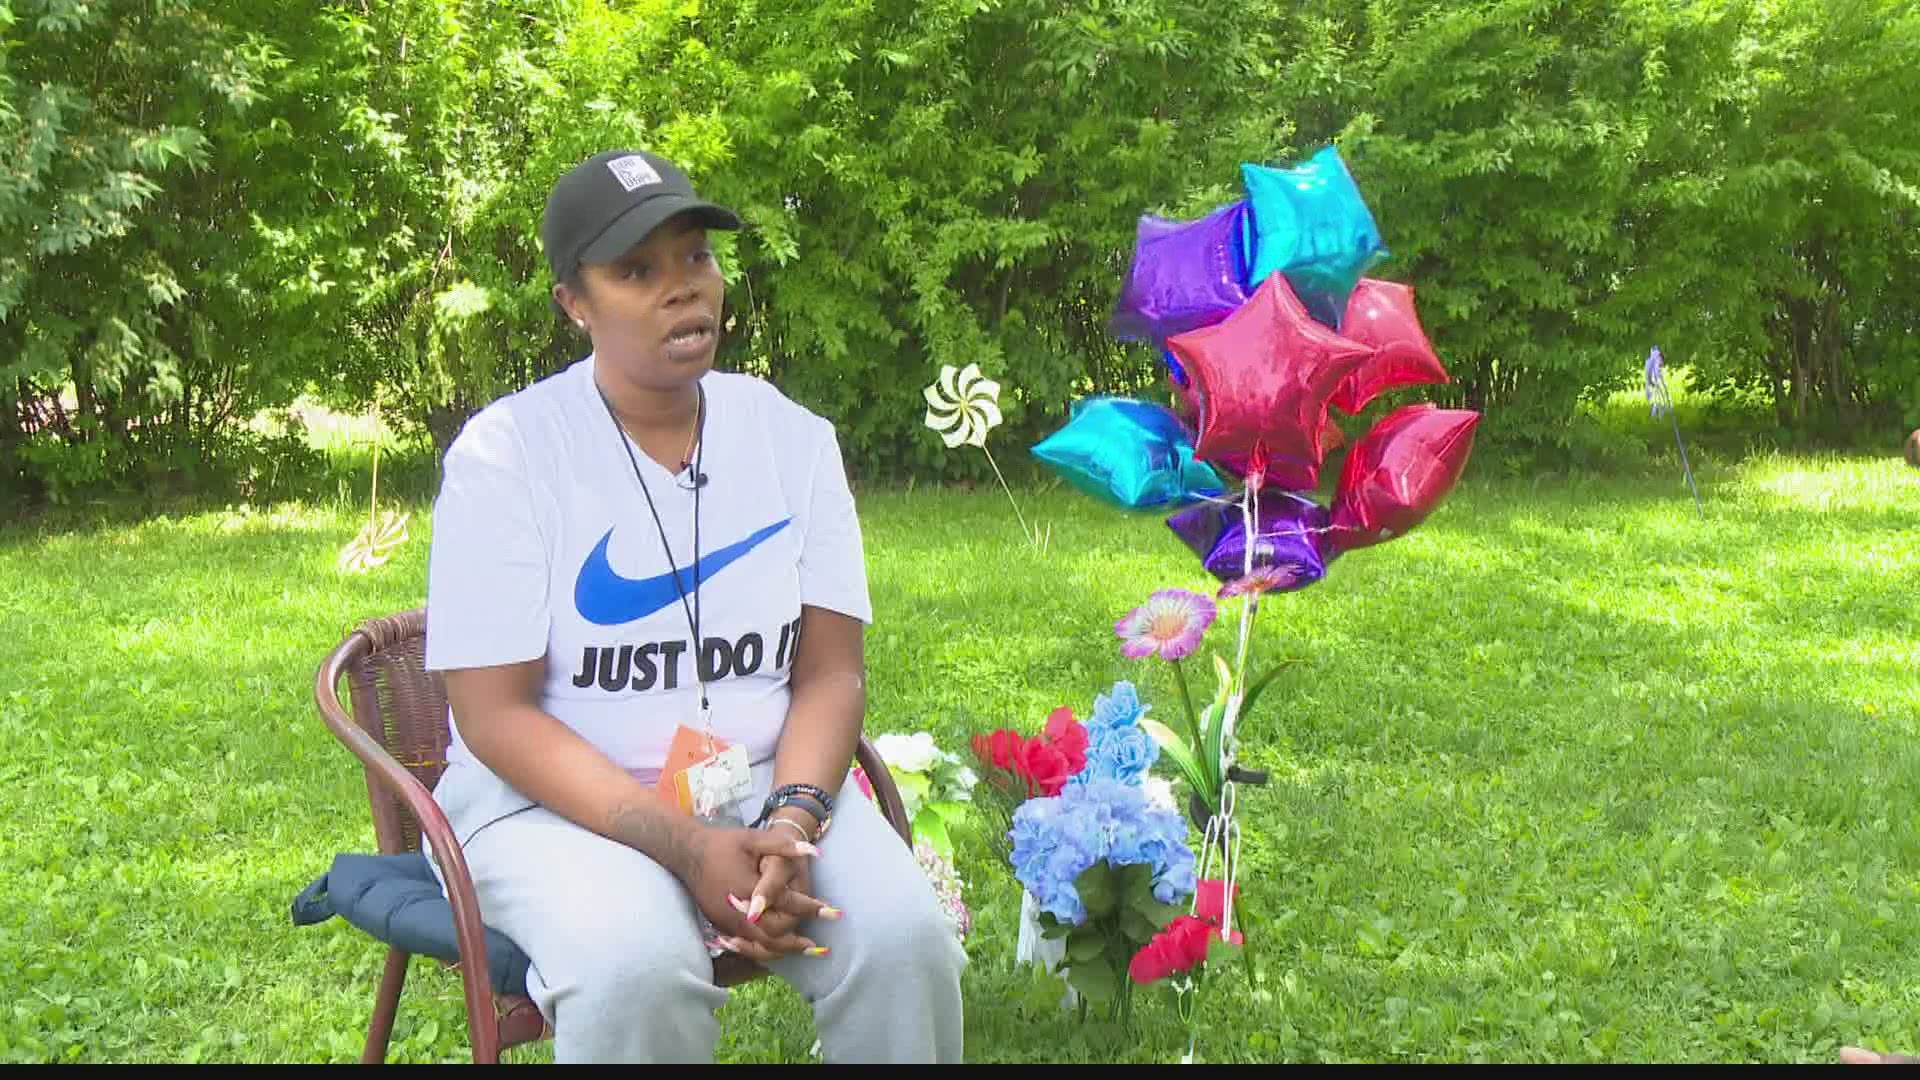 Dayshawn Bills, 9, was playing video games when he was struck by a stray bullet.